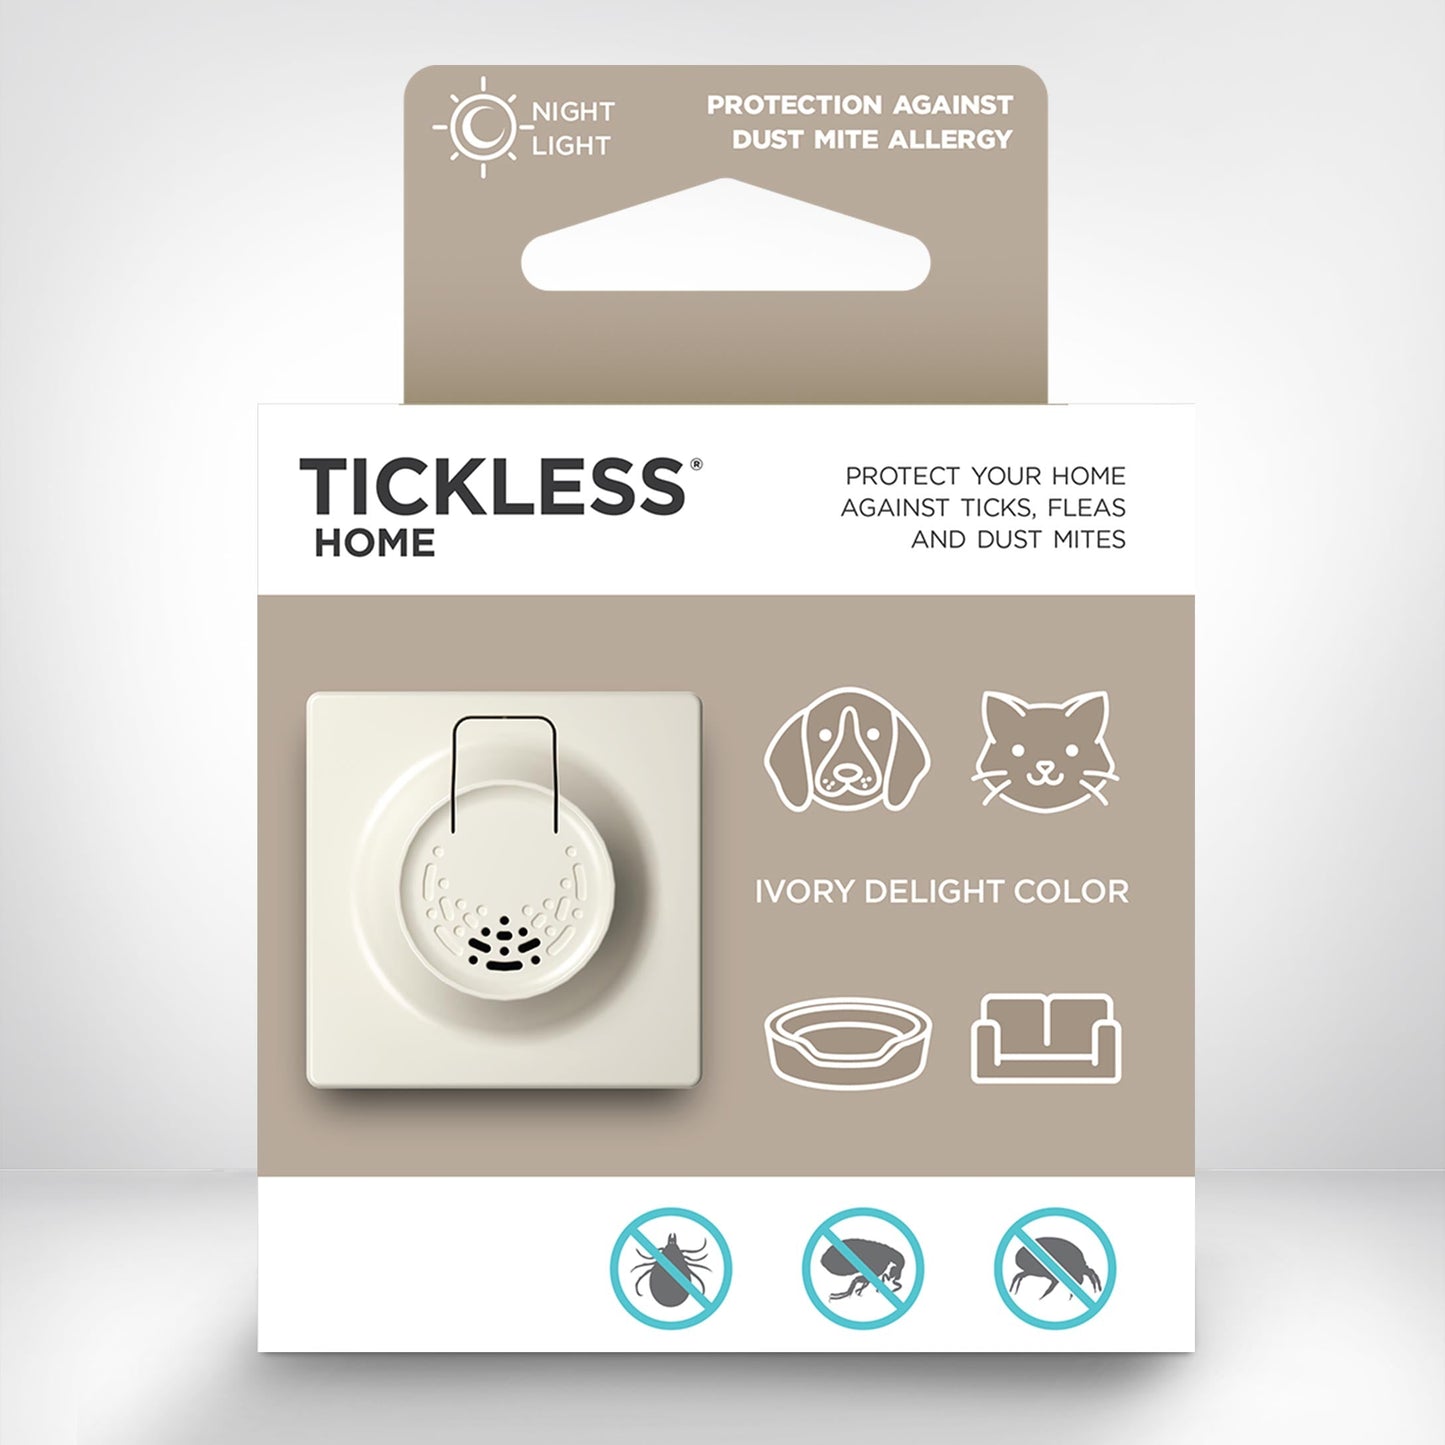 TicklessUSA Black Tickless Home Protection Chemical-Free Tick and Flea Repellent for Homes sonicguard SonicGuard sonicguardusa SonicGuardUSA tick repeller ultrasonic Tickless TicklessUSA tick and flea repellent safe